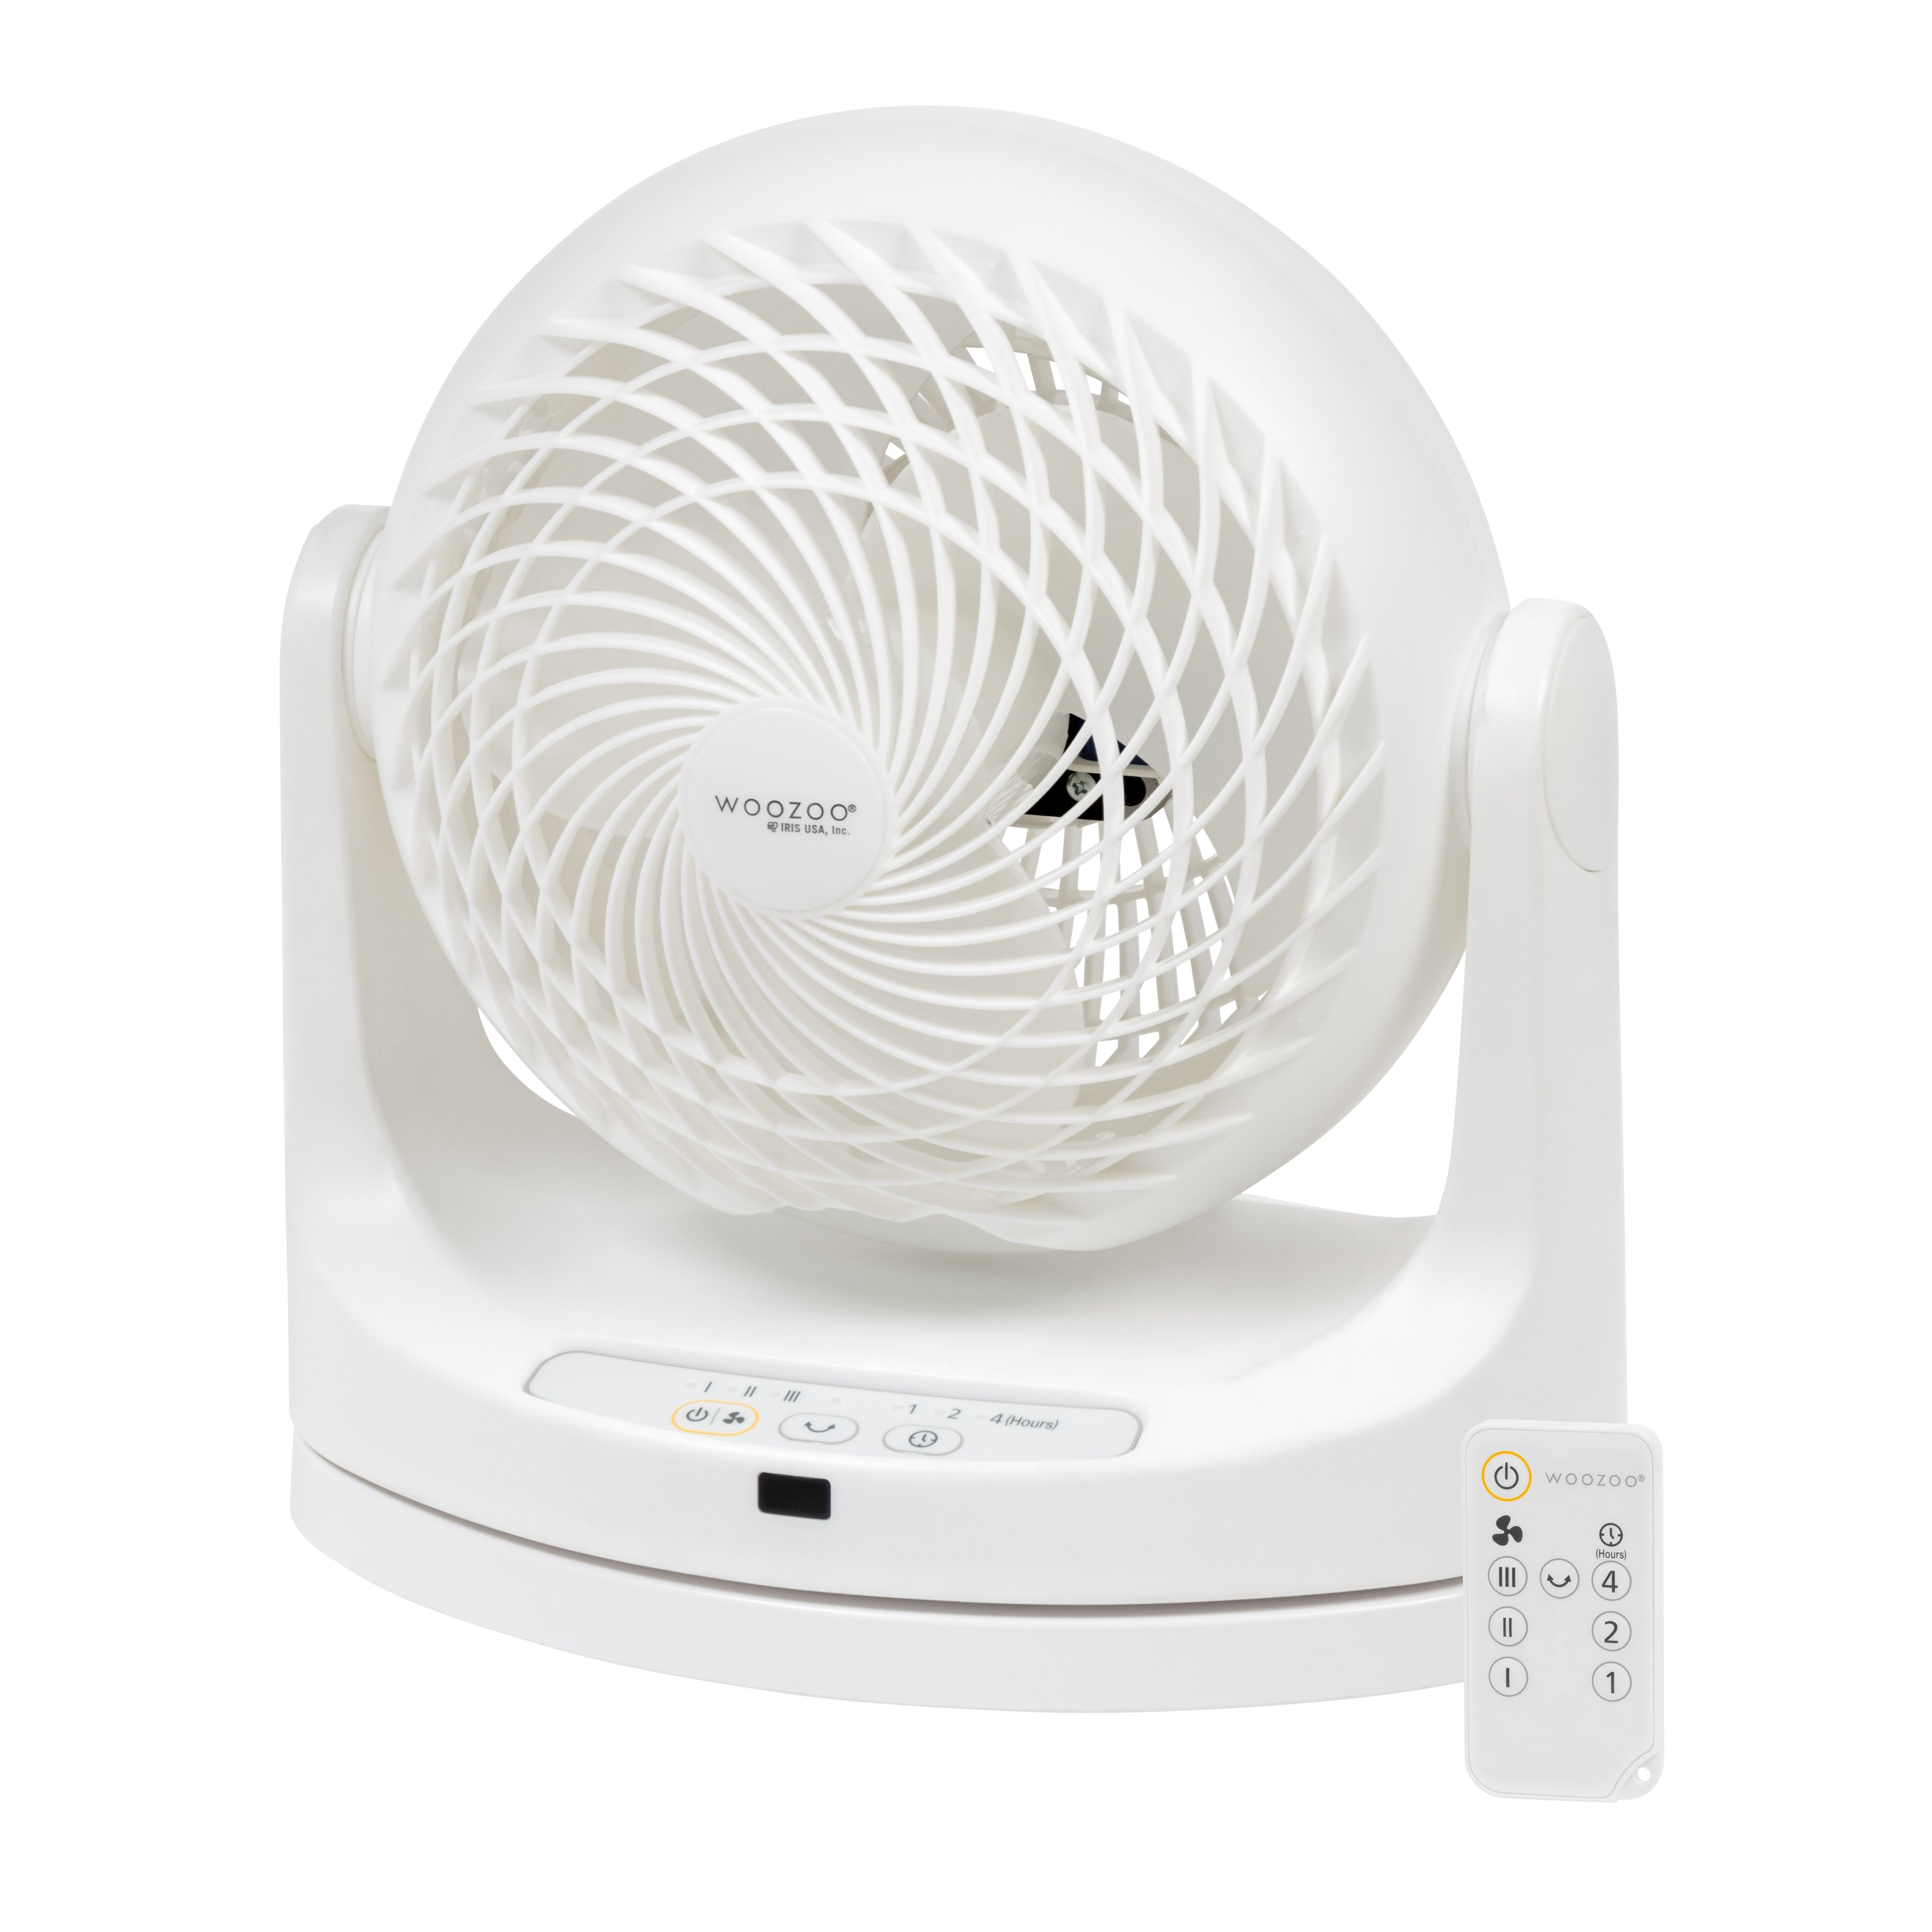 WOOZOO Oscillating Air Circulator Fan with Remote Control, White